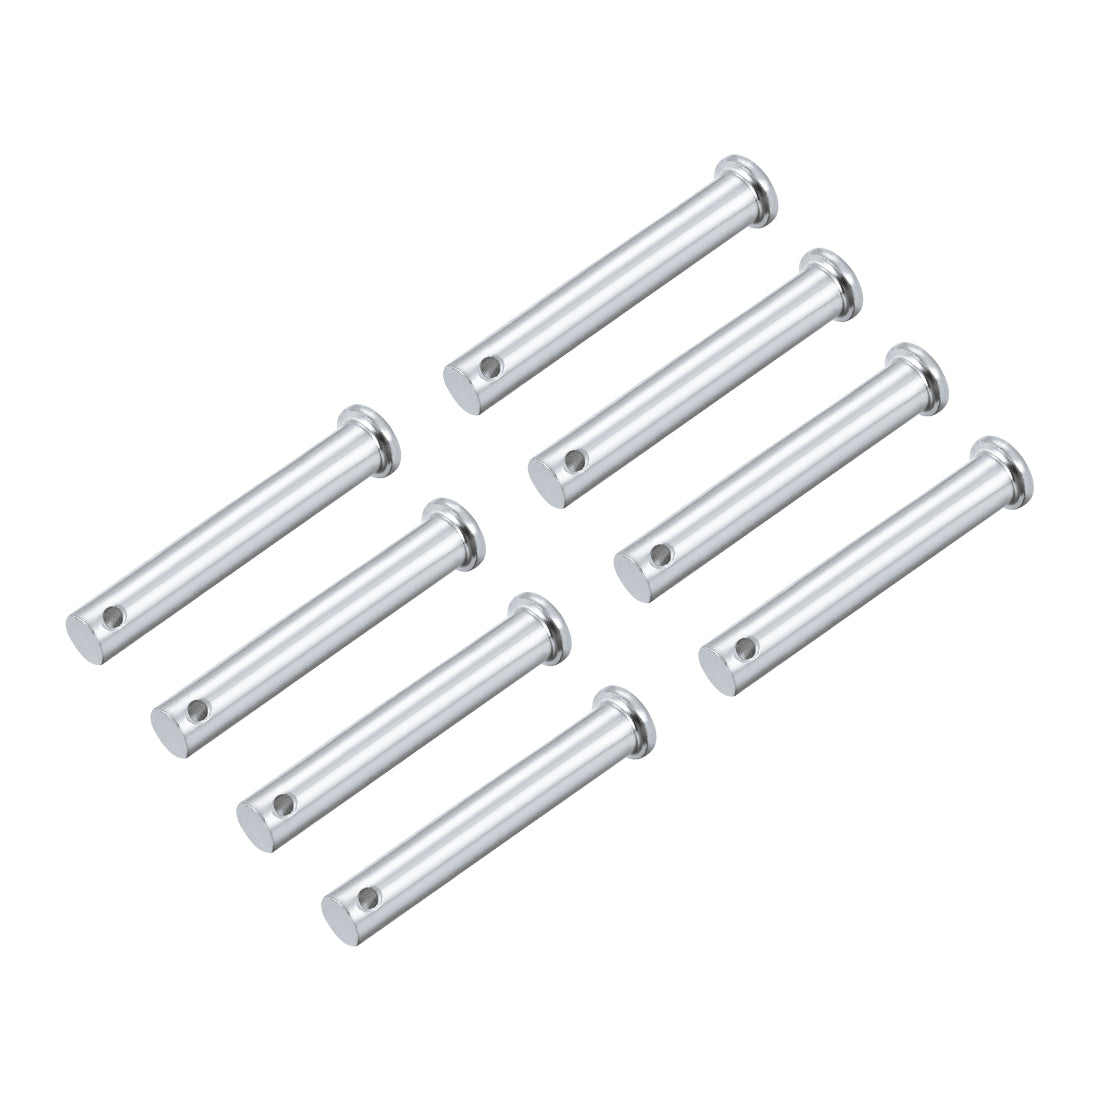 uxcell Uxcell Single Hole Clevis Pins -  Flat Head Zinc-Plating Solid Steel Link Hinge Pin 8Pcs